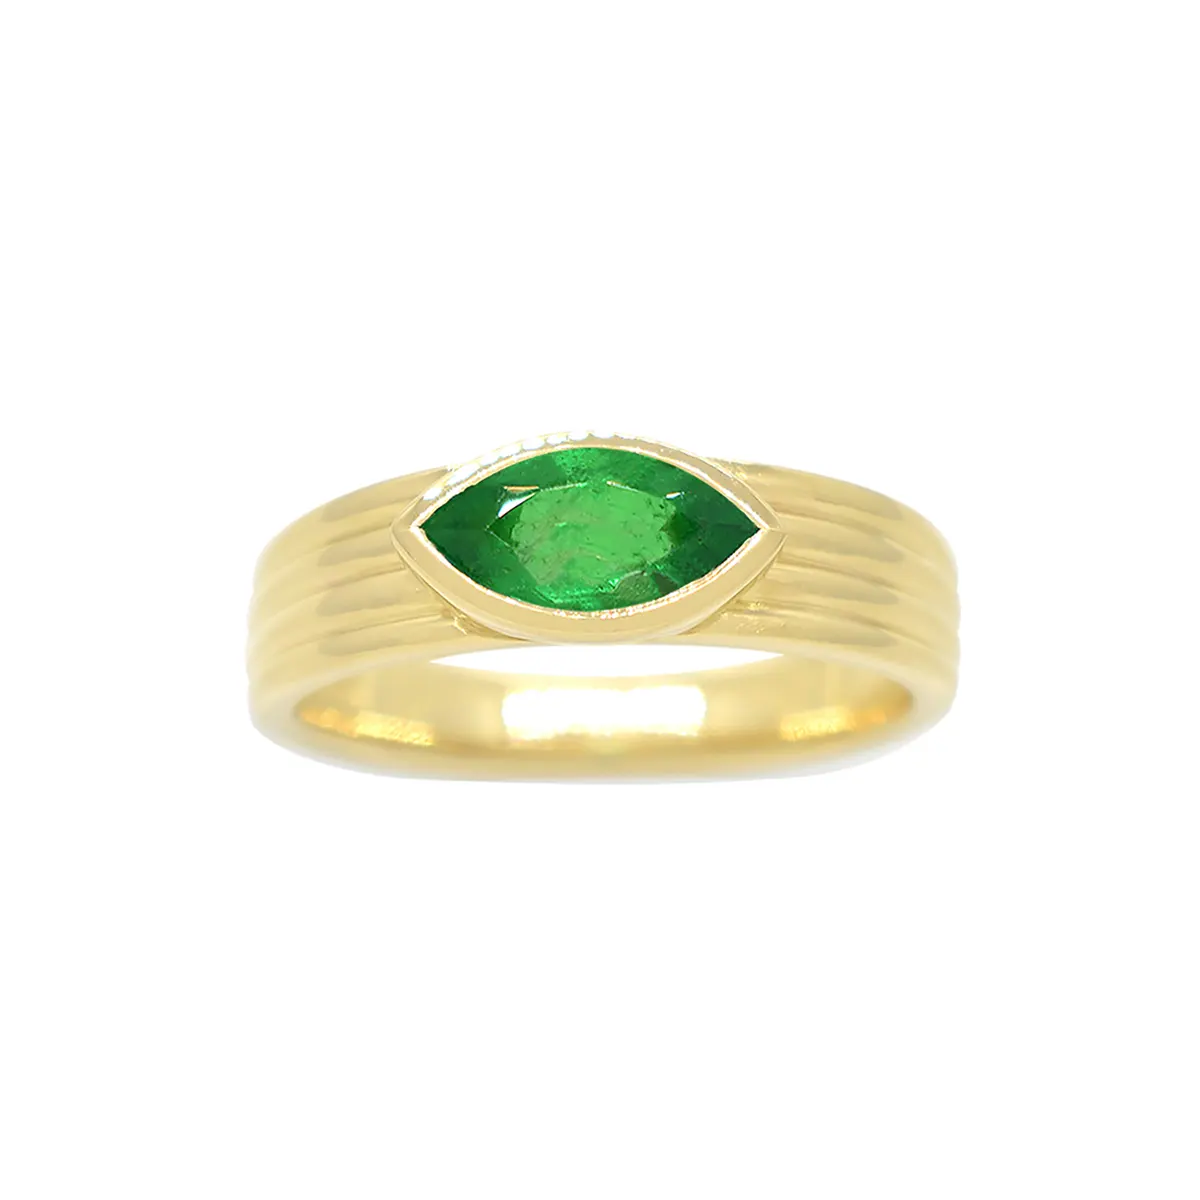 18K Gold Solitaire Emerald Ring with Marquise Shape Natural Emerald